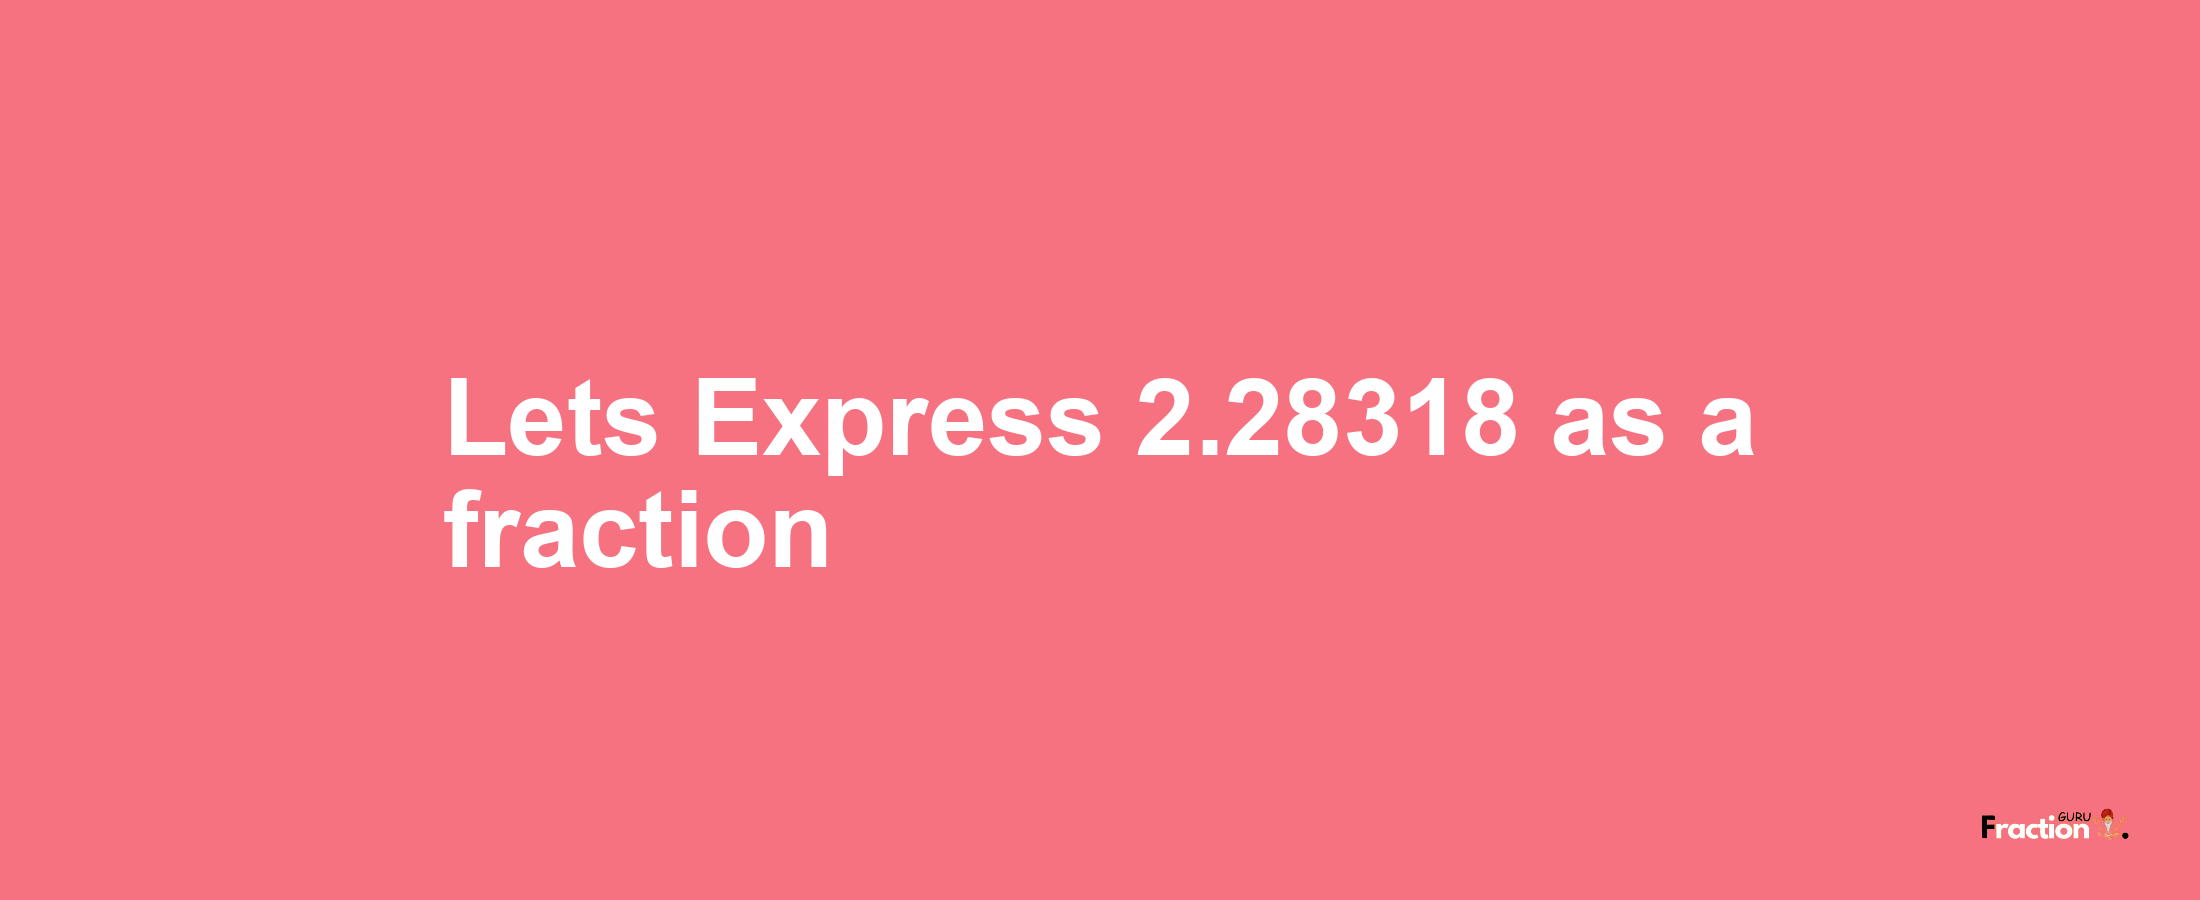 Lets Express 2.28318 as afraction